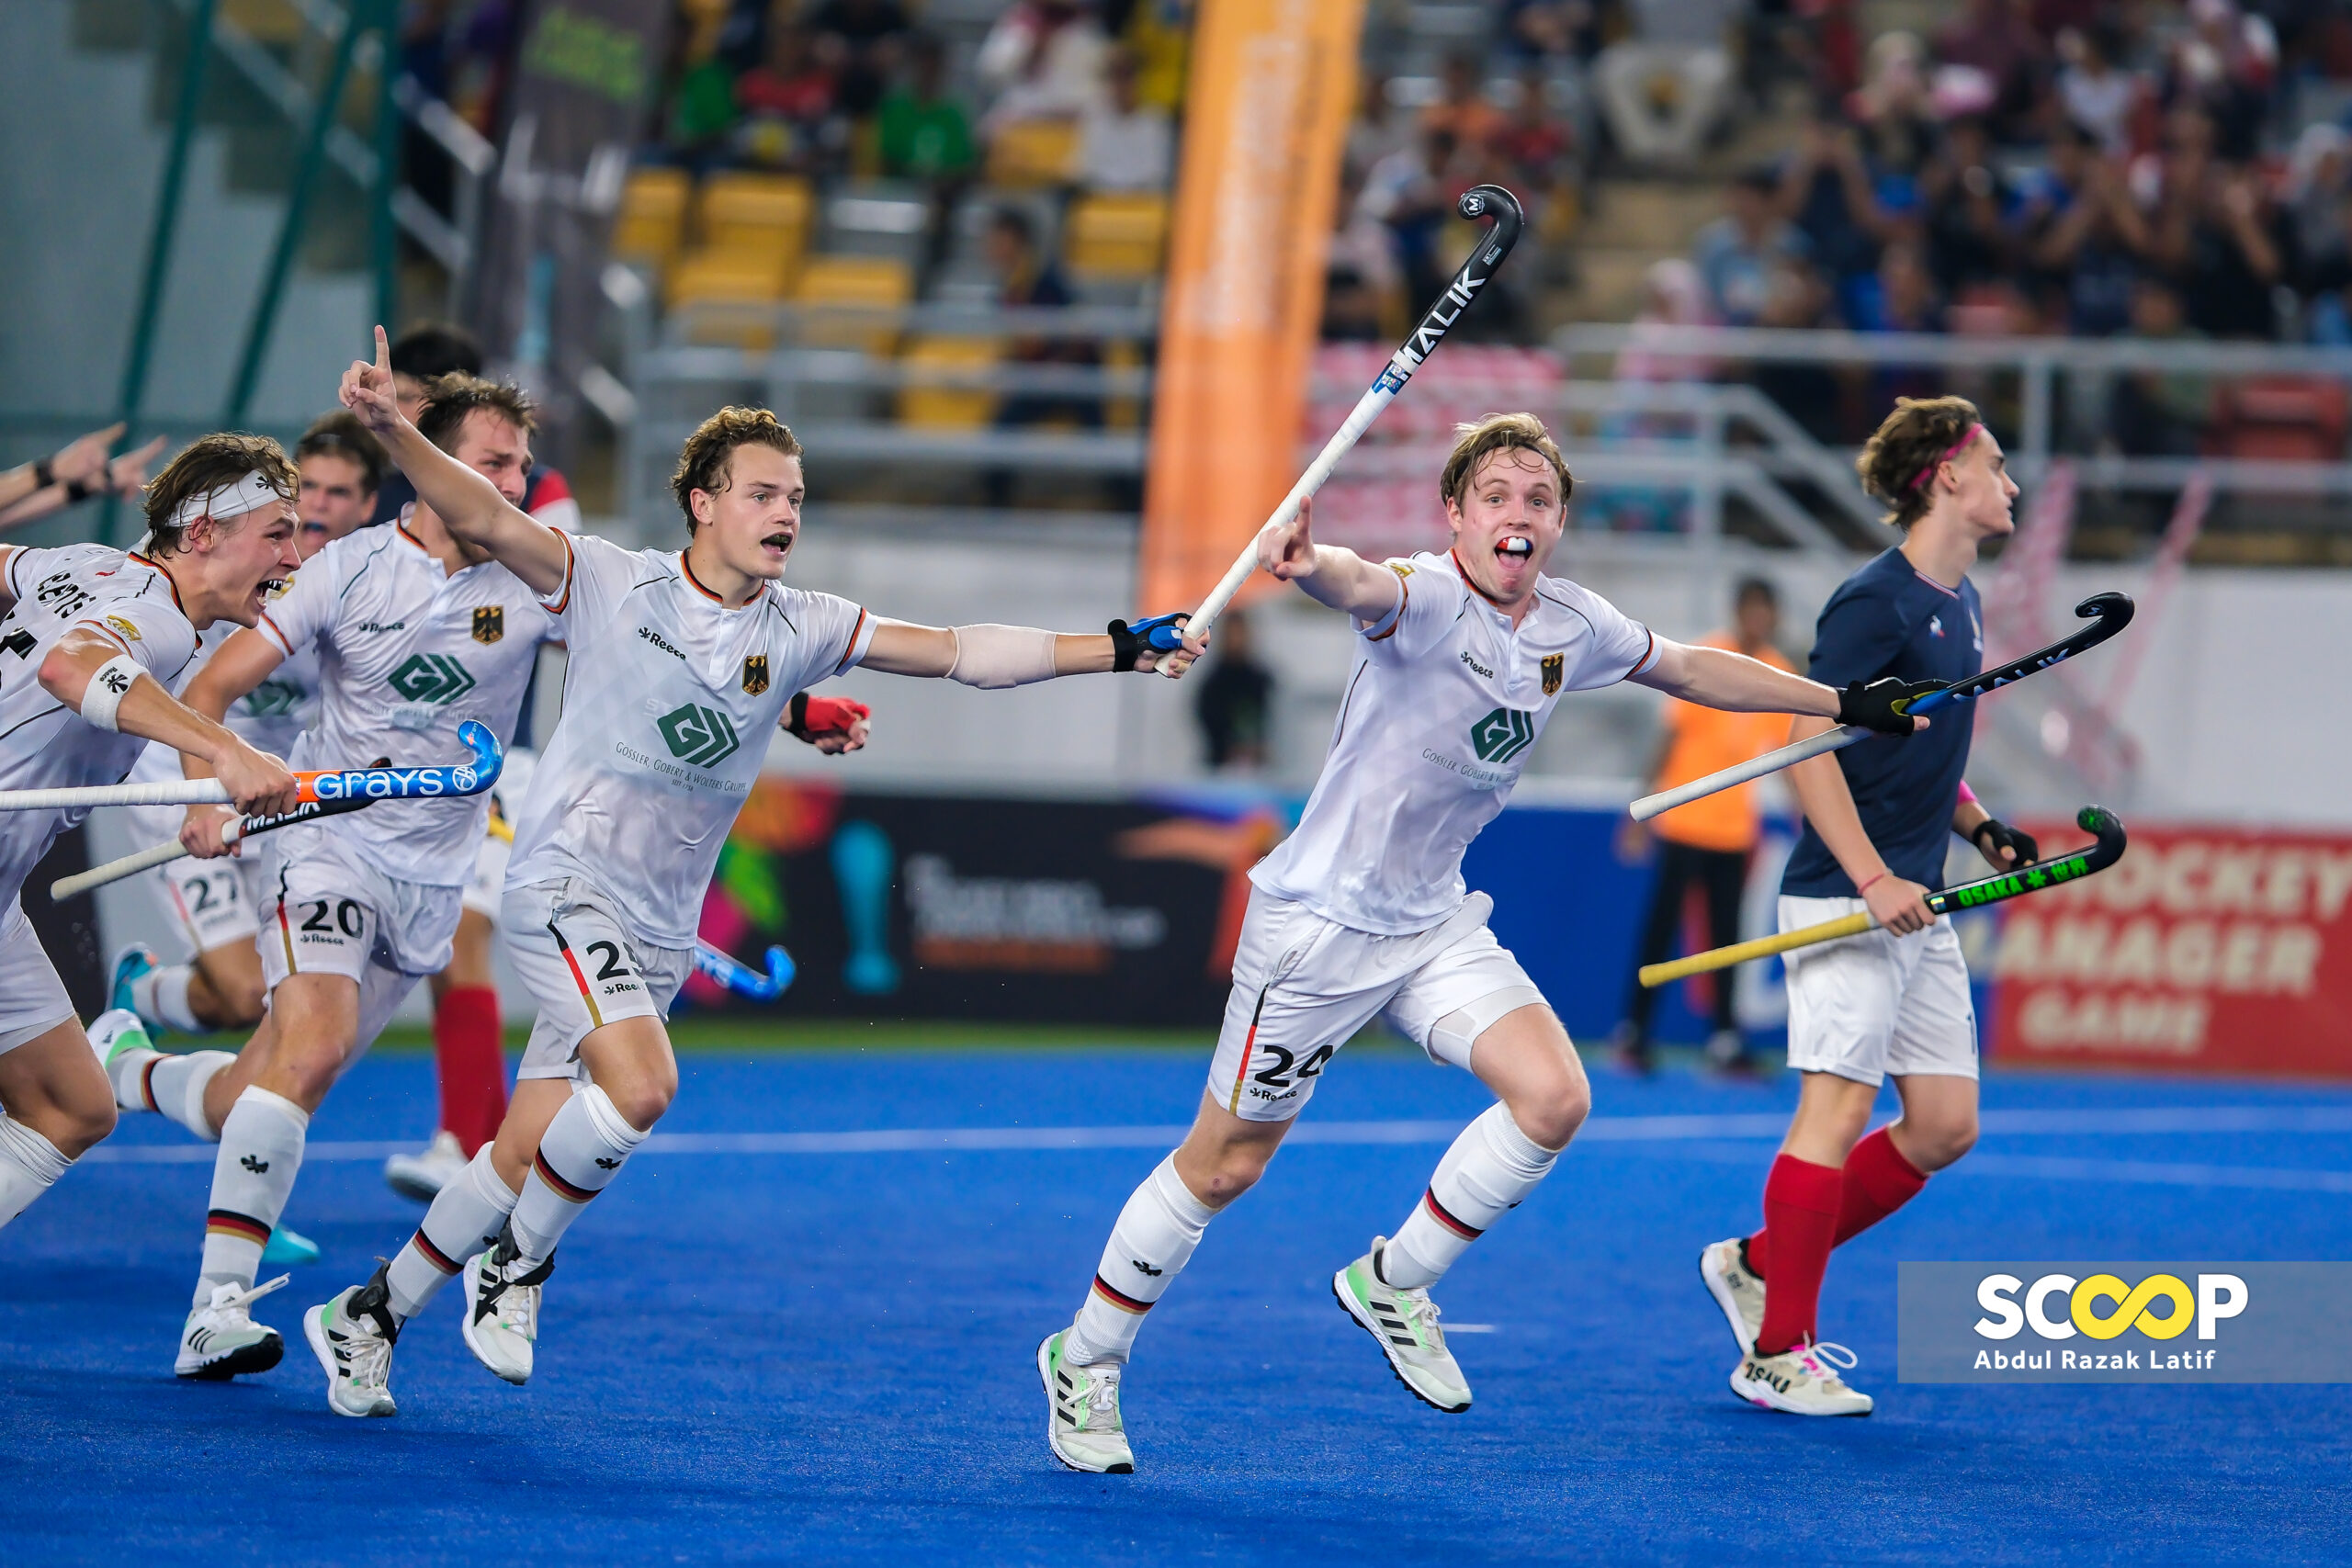 2023 FIH Men’s Junior World Cup ignited passion with unforgettable moments